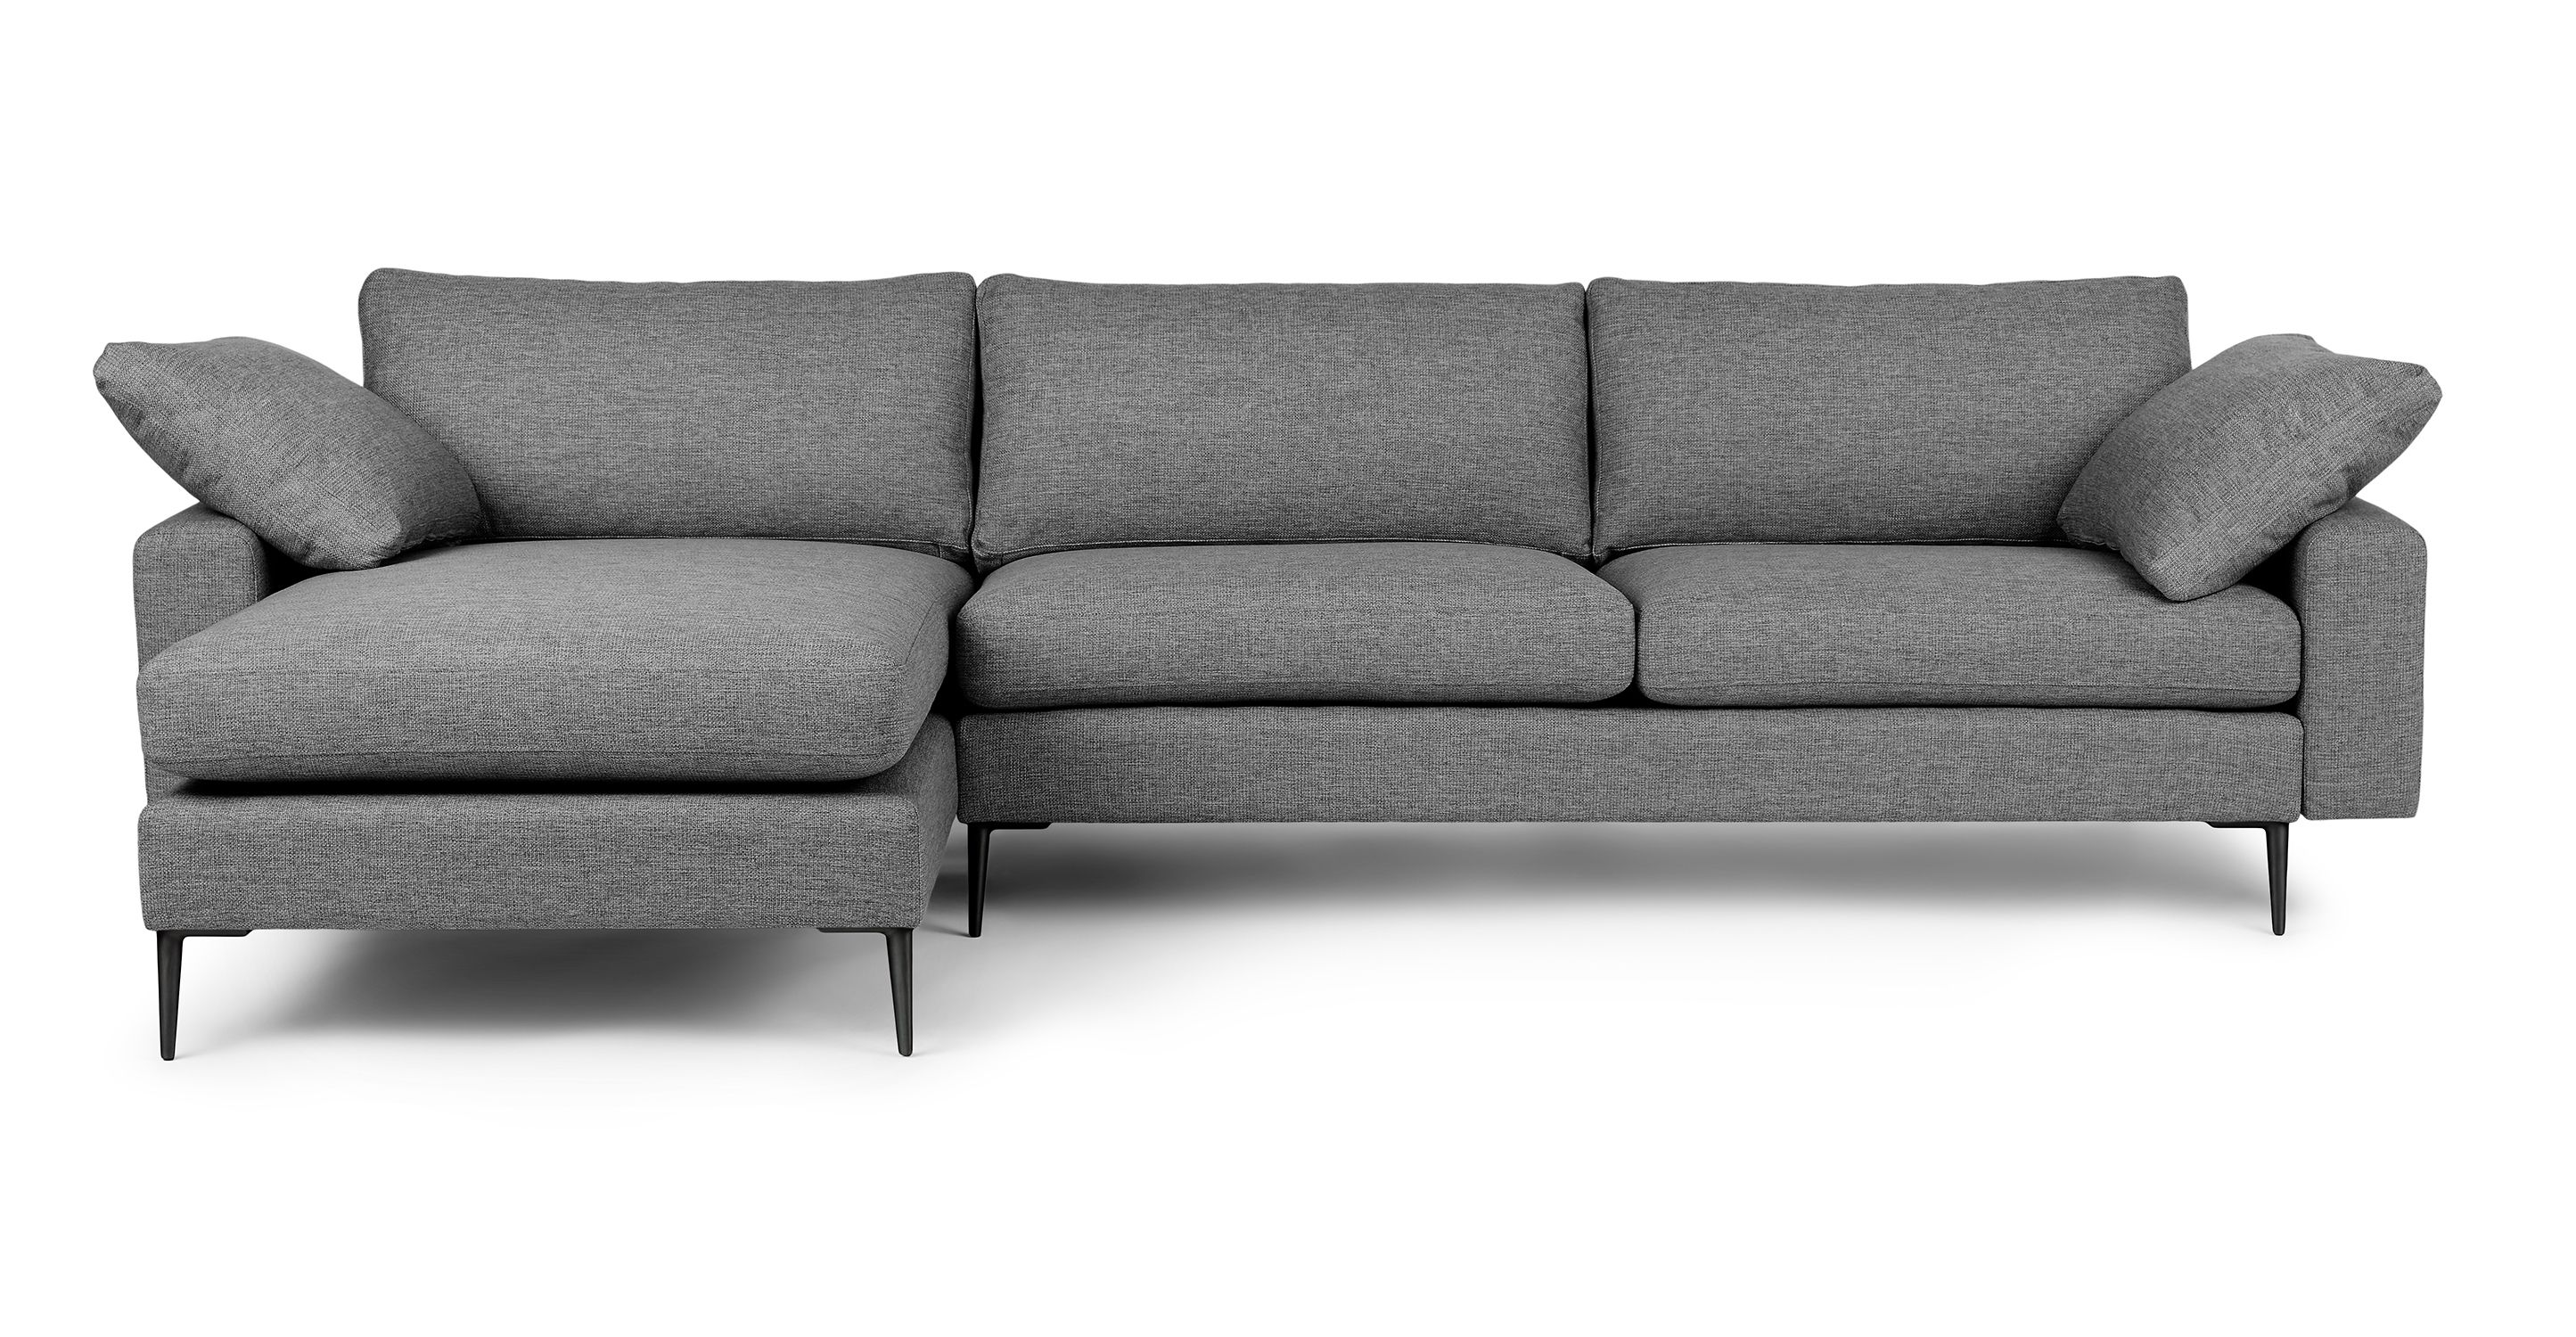 Gravel Gray Reversible Fabric Sectional | Nova | Article Within Reversible Sectional Sofas (Gallery 4 of 20)